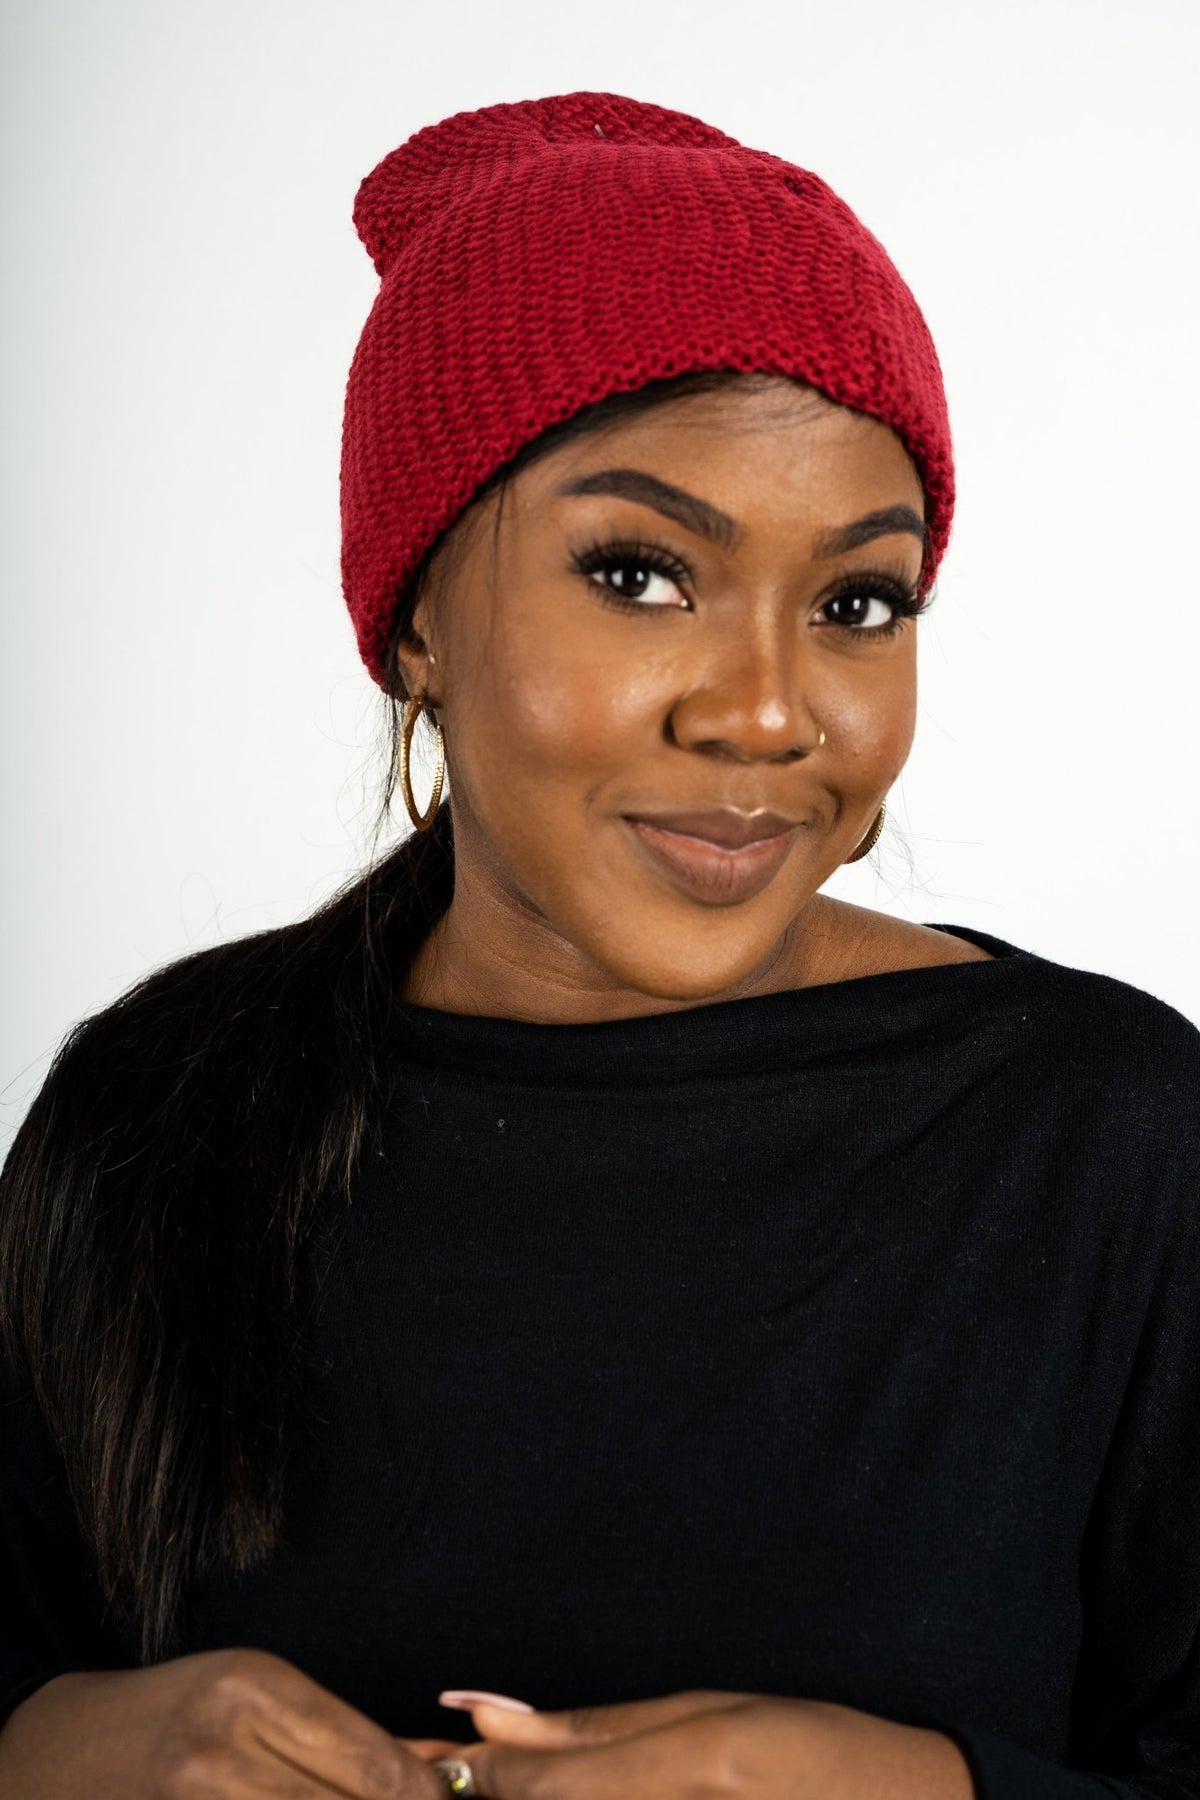 Textured slouchy beanie red - Trendy Beanies at Lush Fashion Lounge Boutique in Oklahoma City